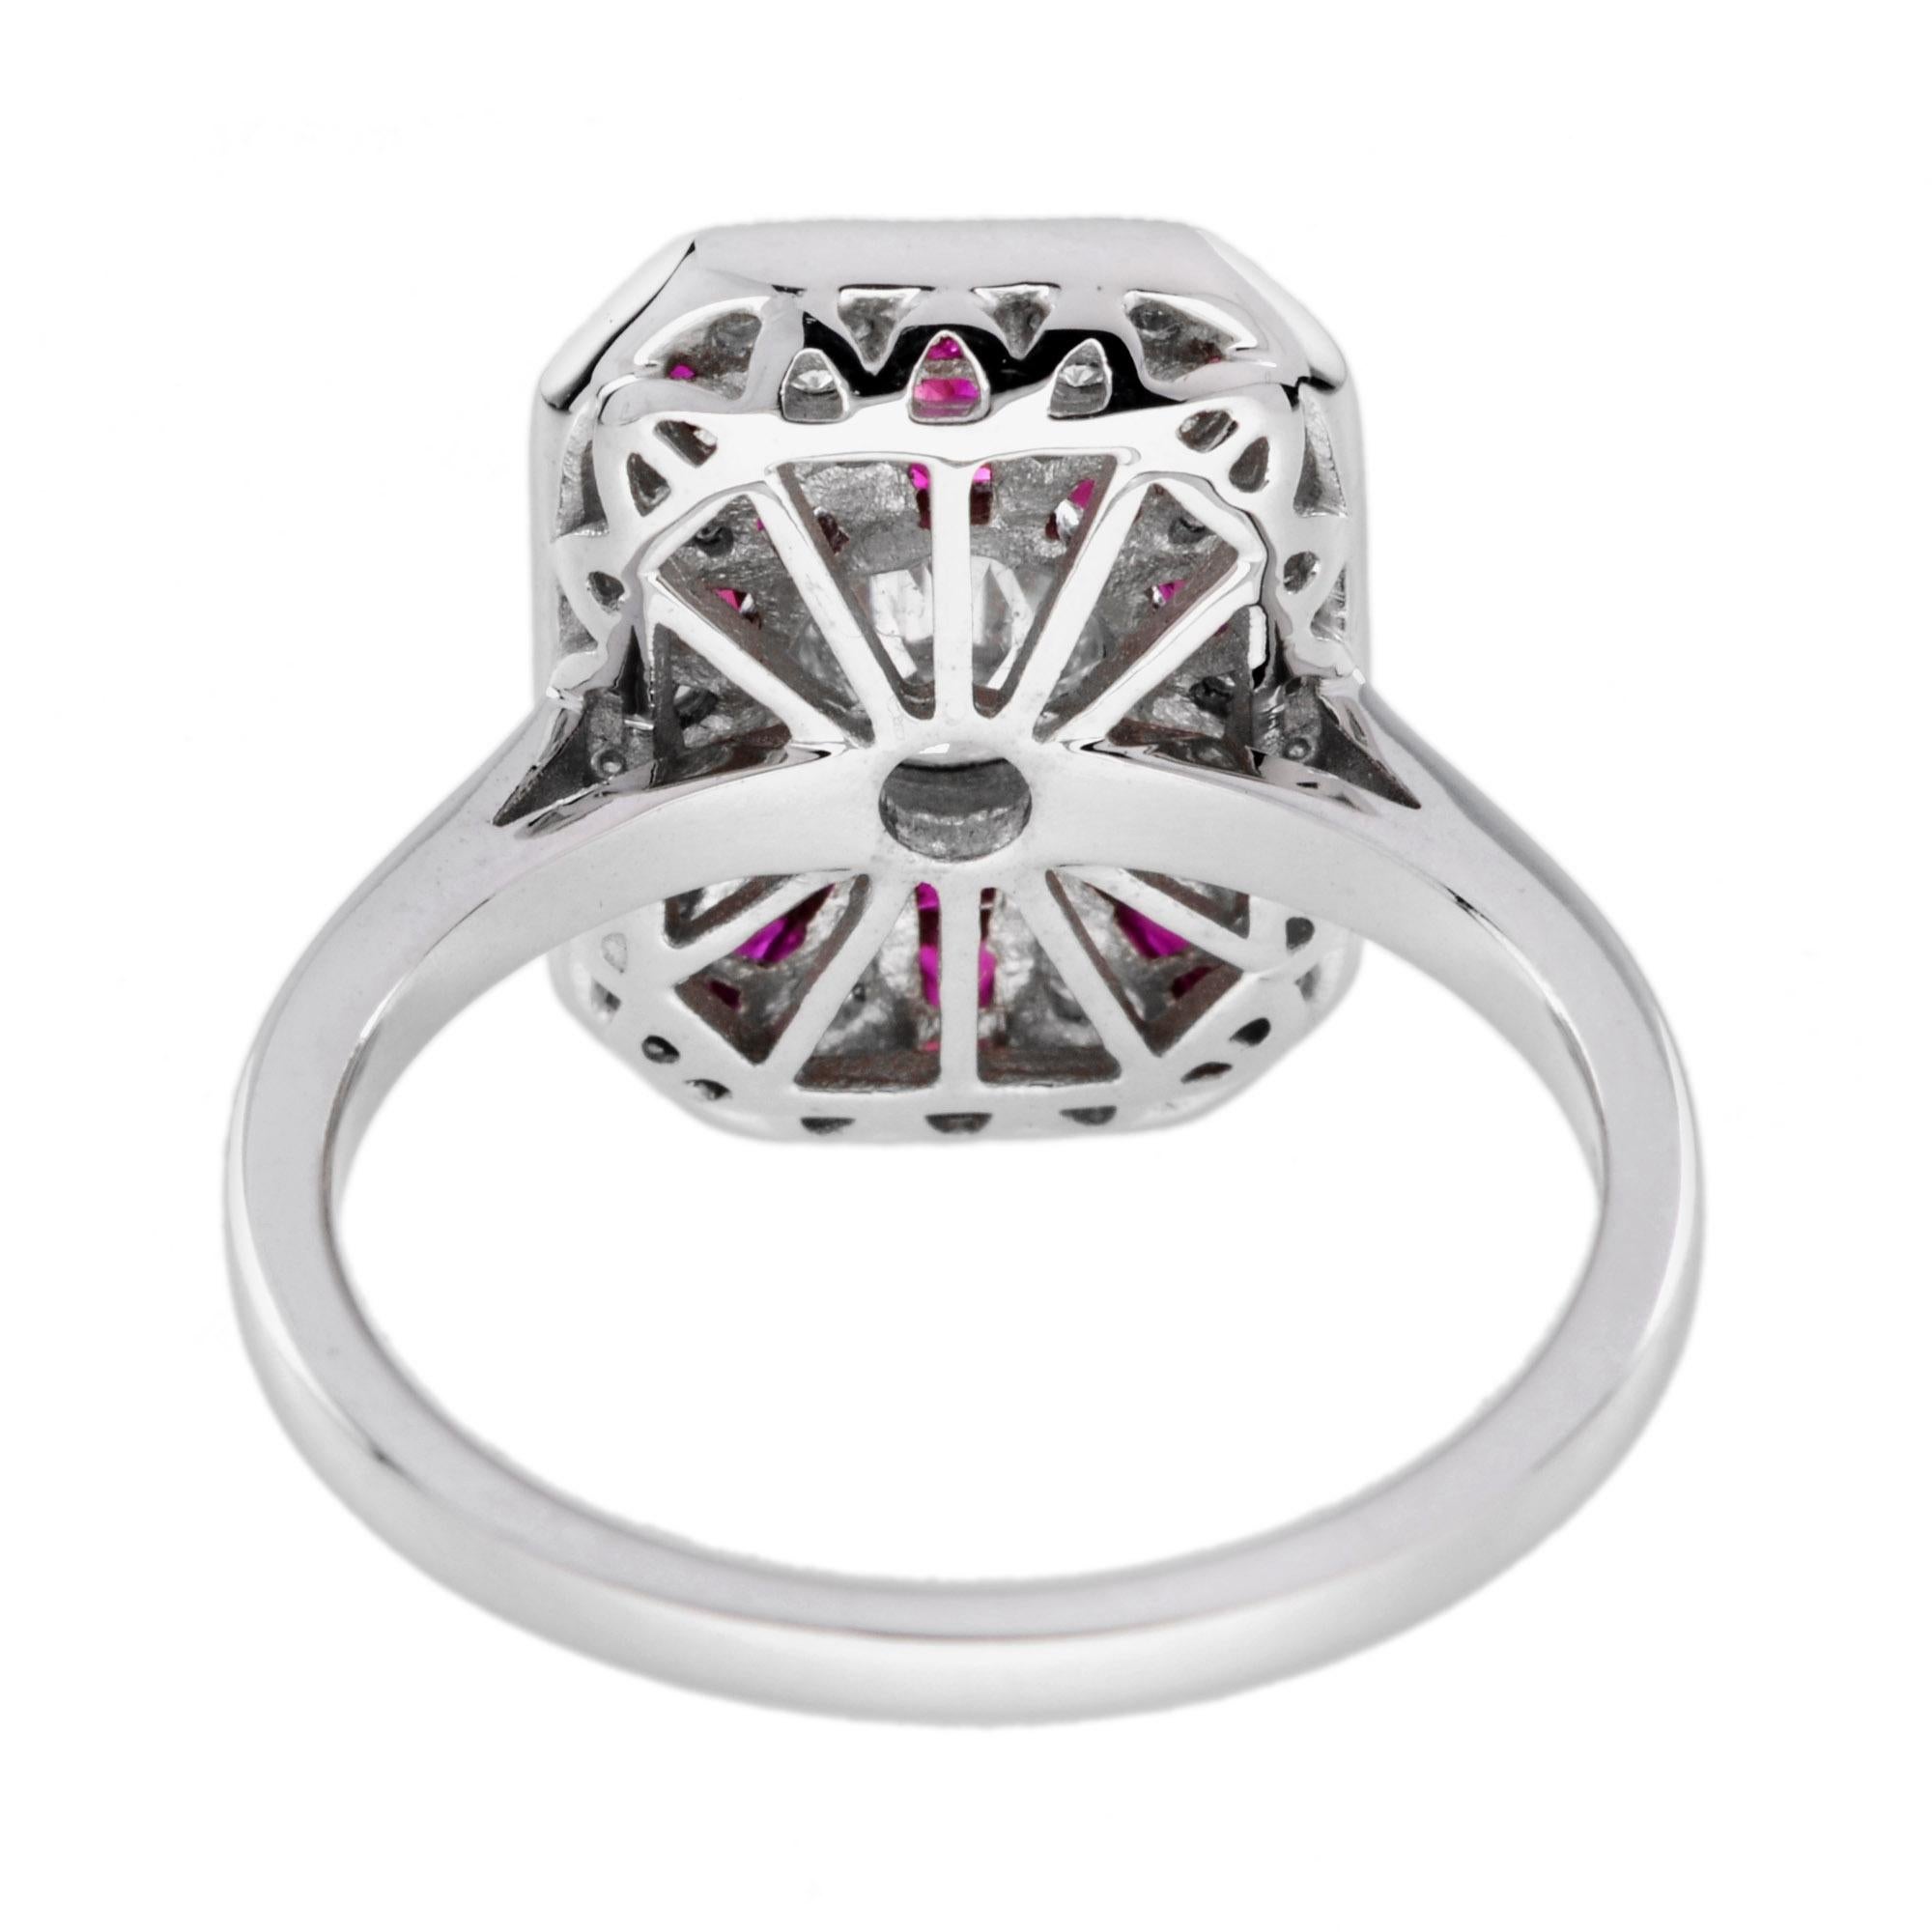 Old Mine Cut Old Cut Diamond and Ruby Art Deco Style Halo Ring in 18k White Gold